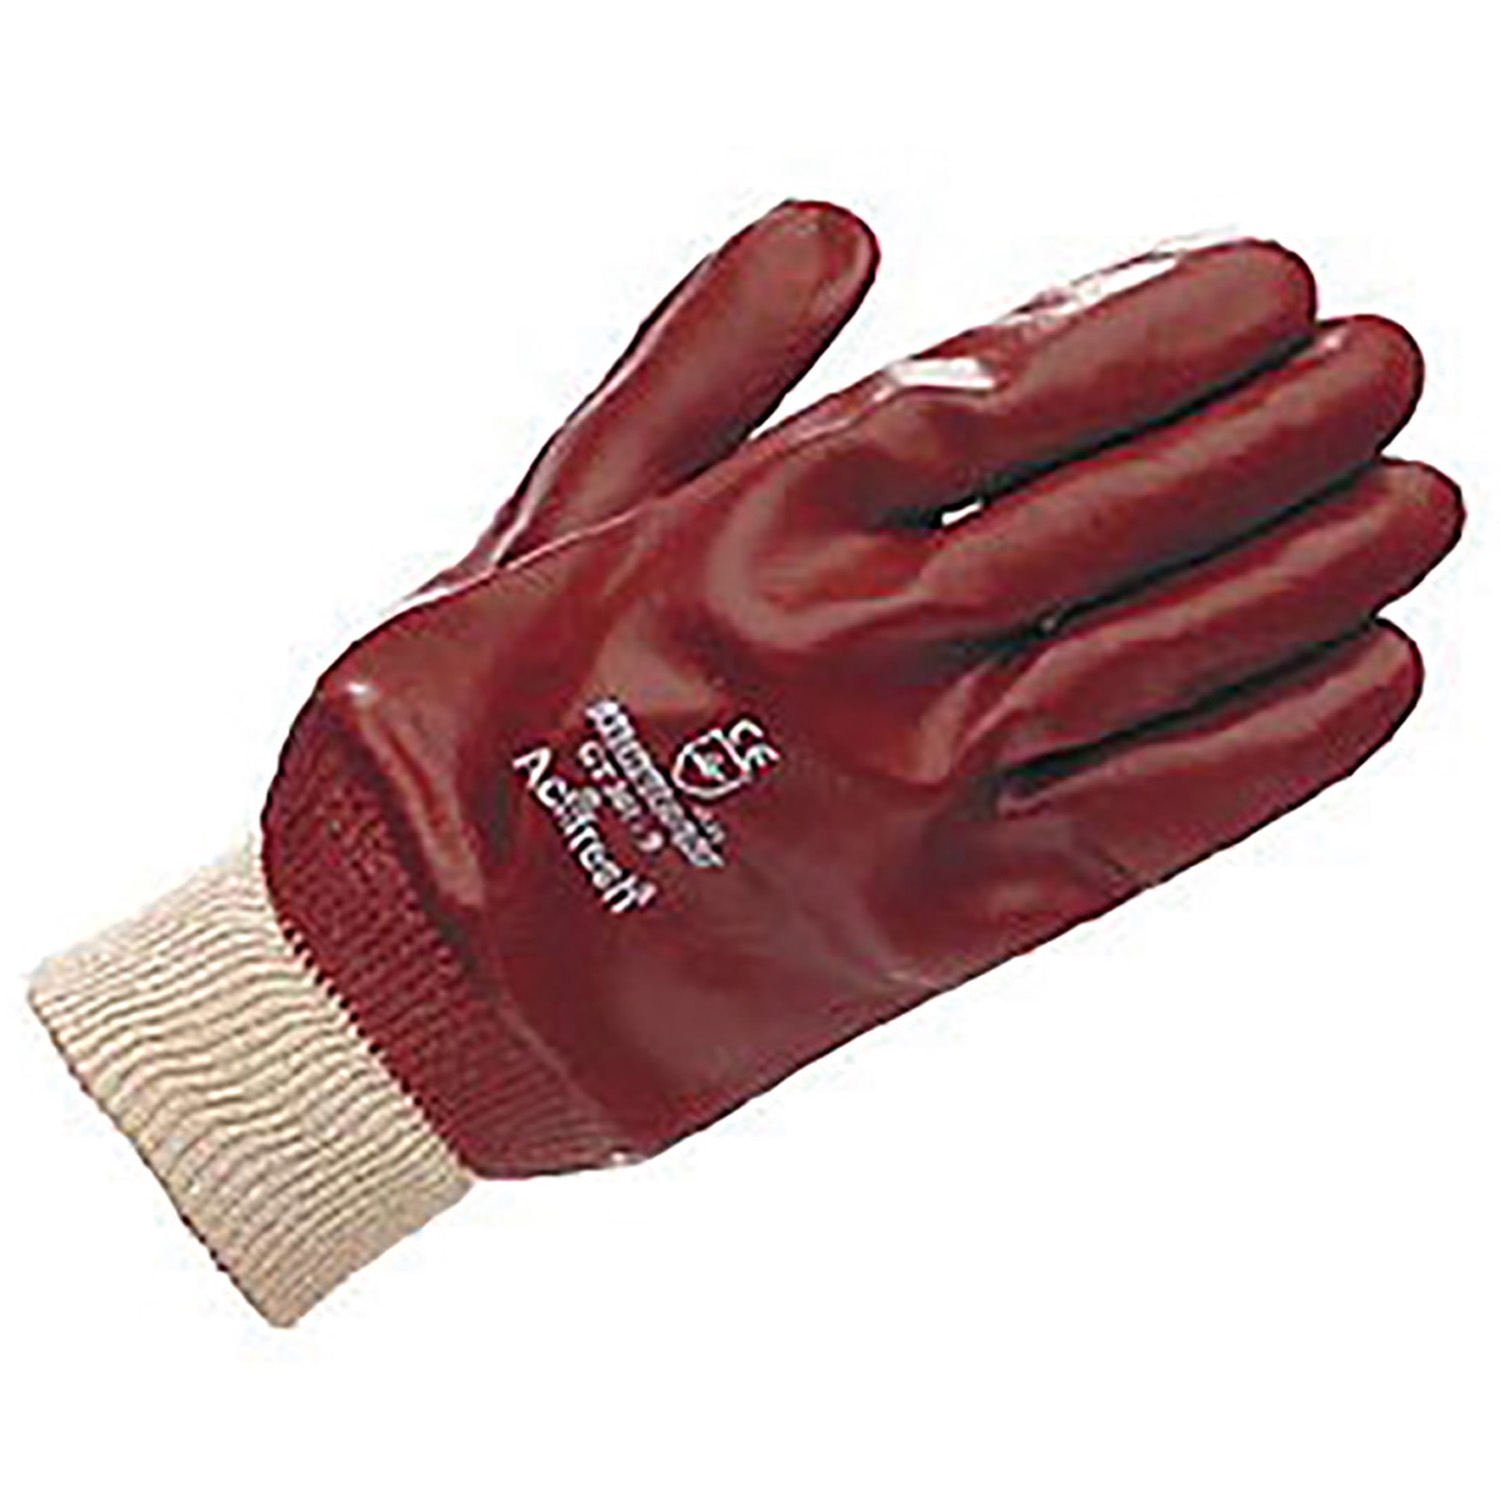 GLOVES PVC FULLY COATED KNIT WRIST  RED